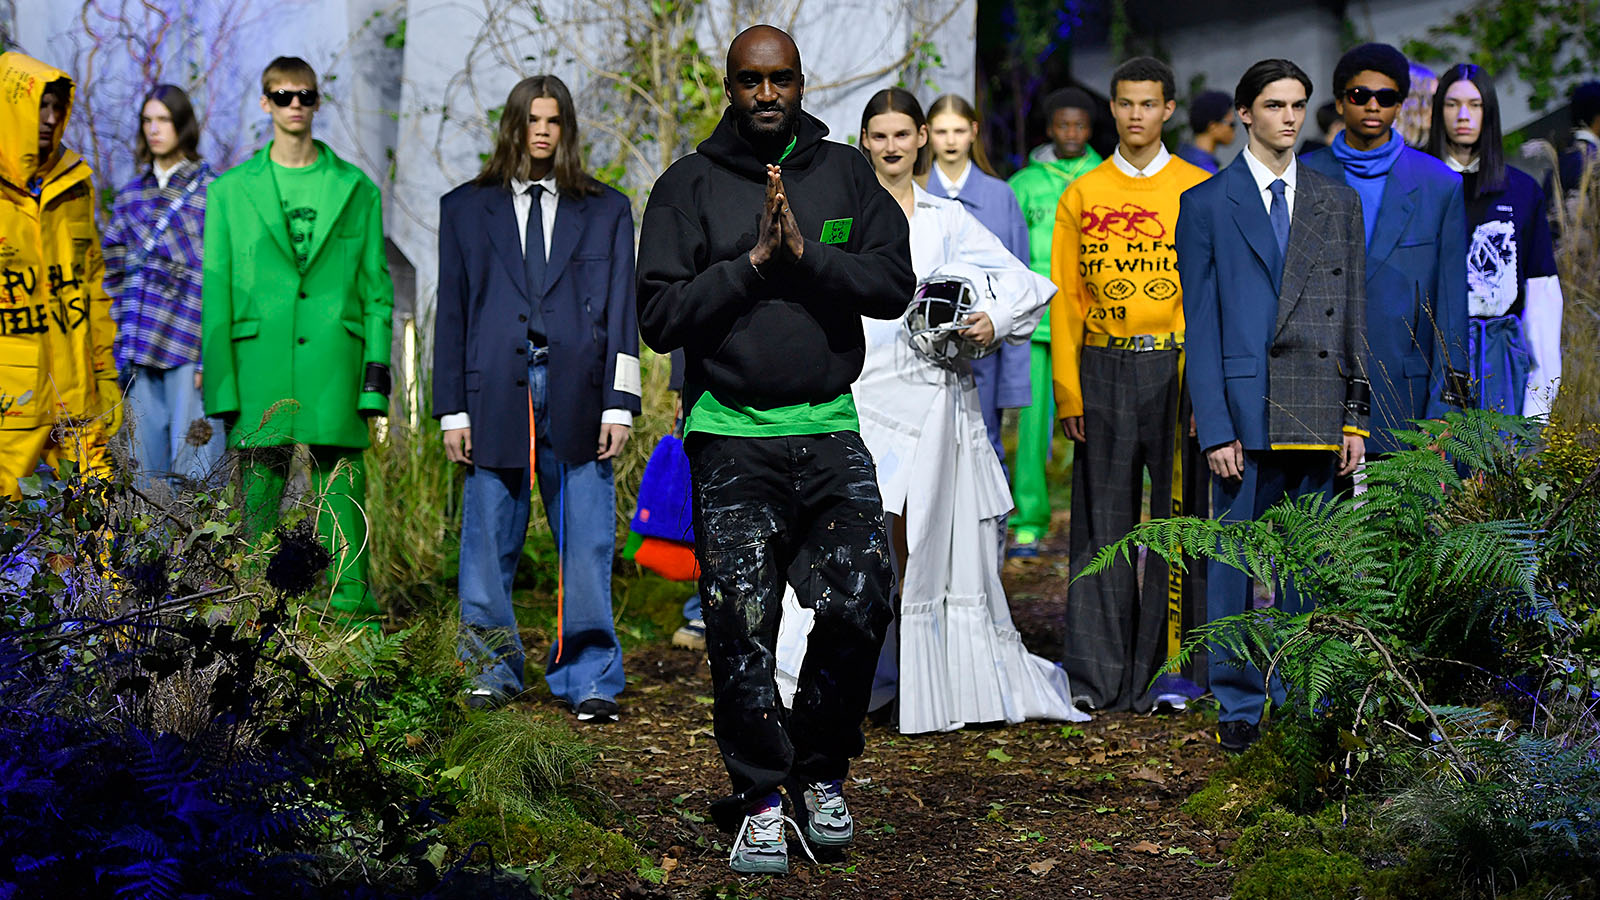 Off-White's Virgil Abloh Is Changing How We See Streetwear